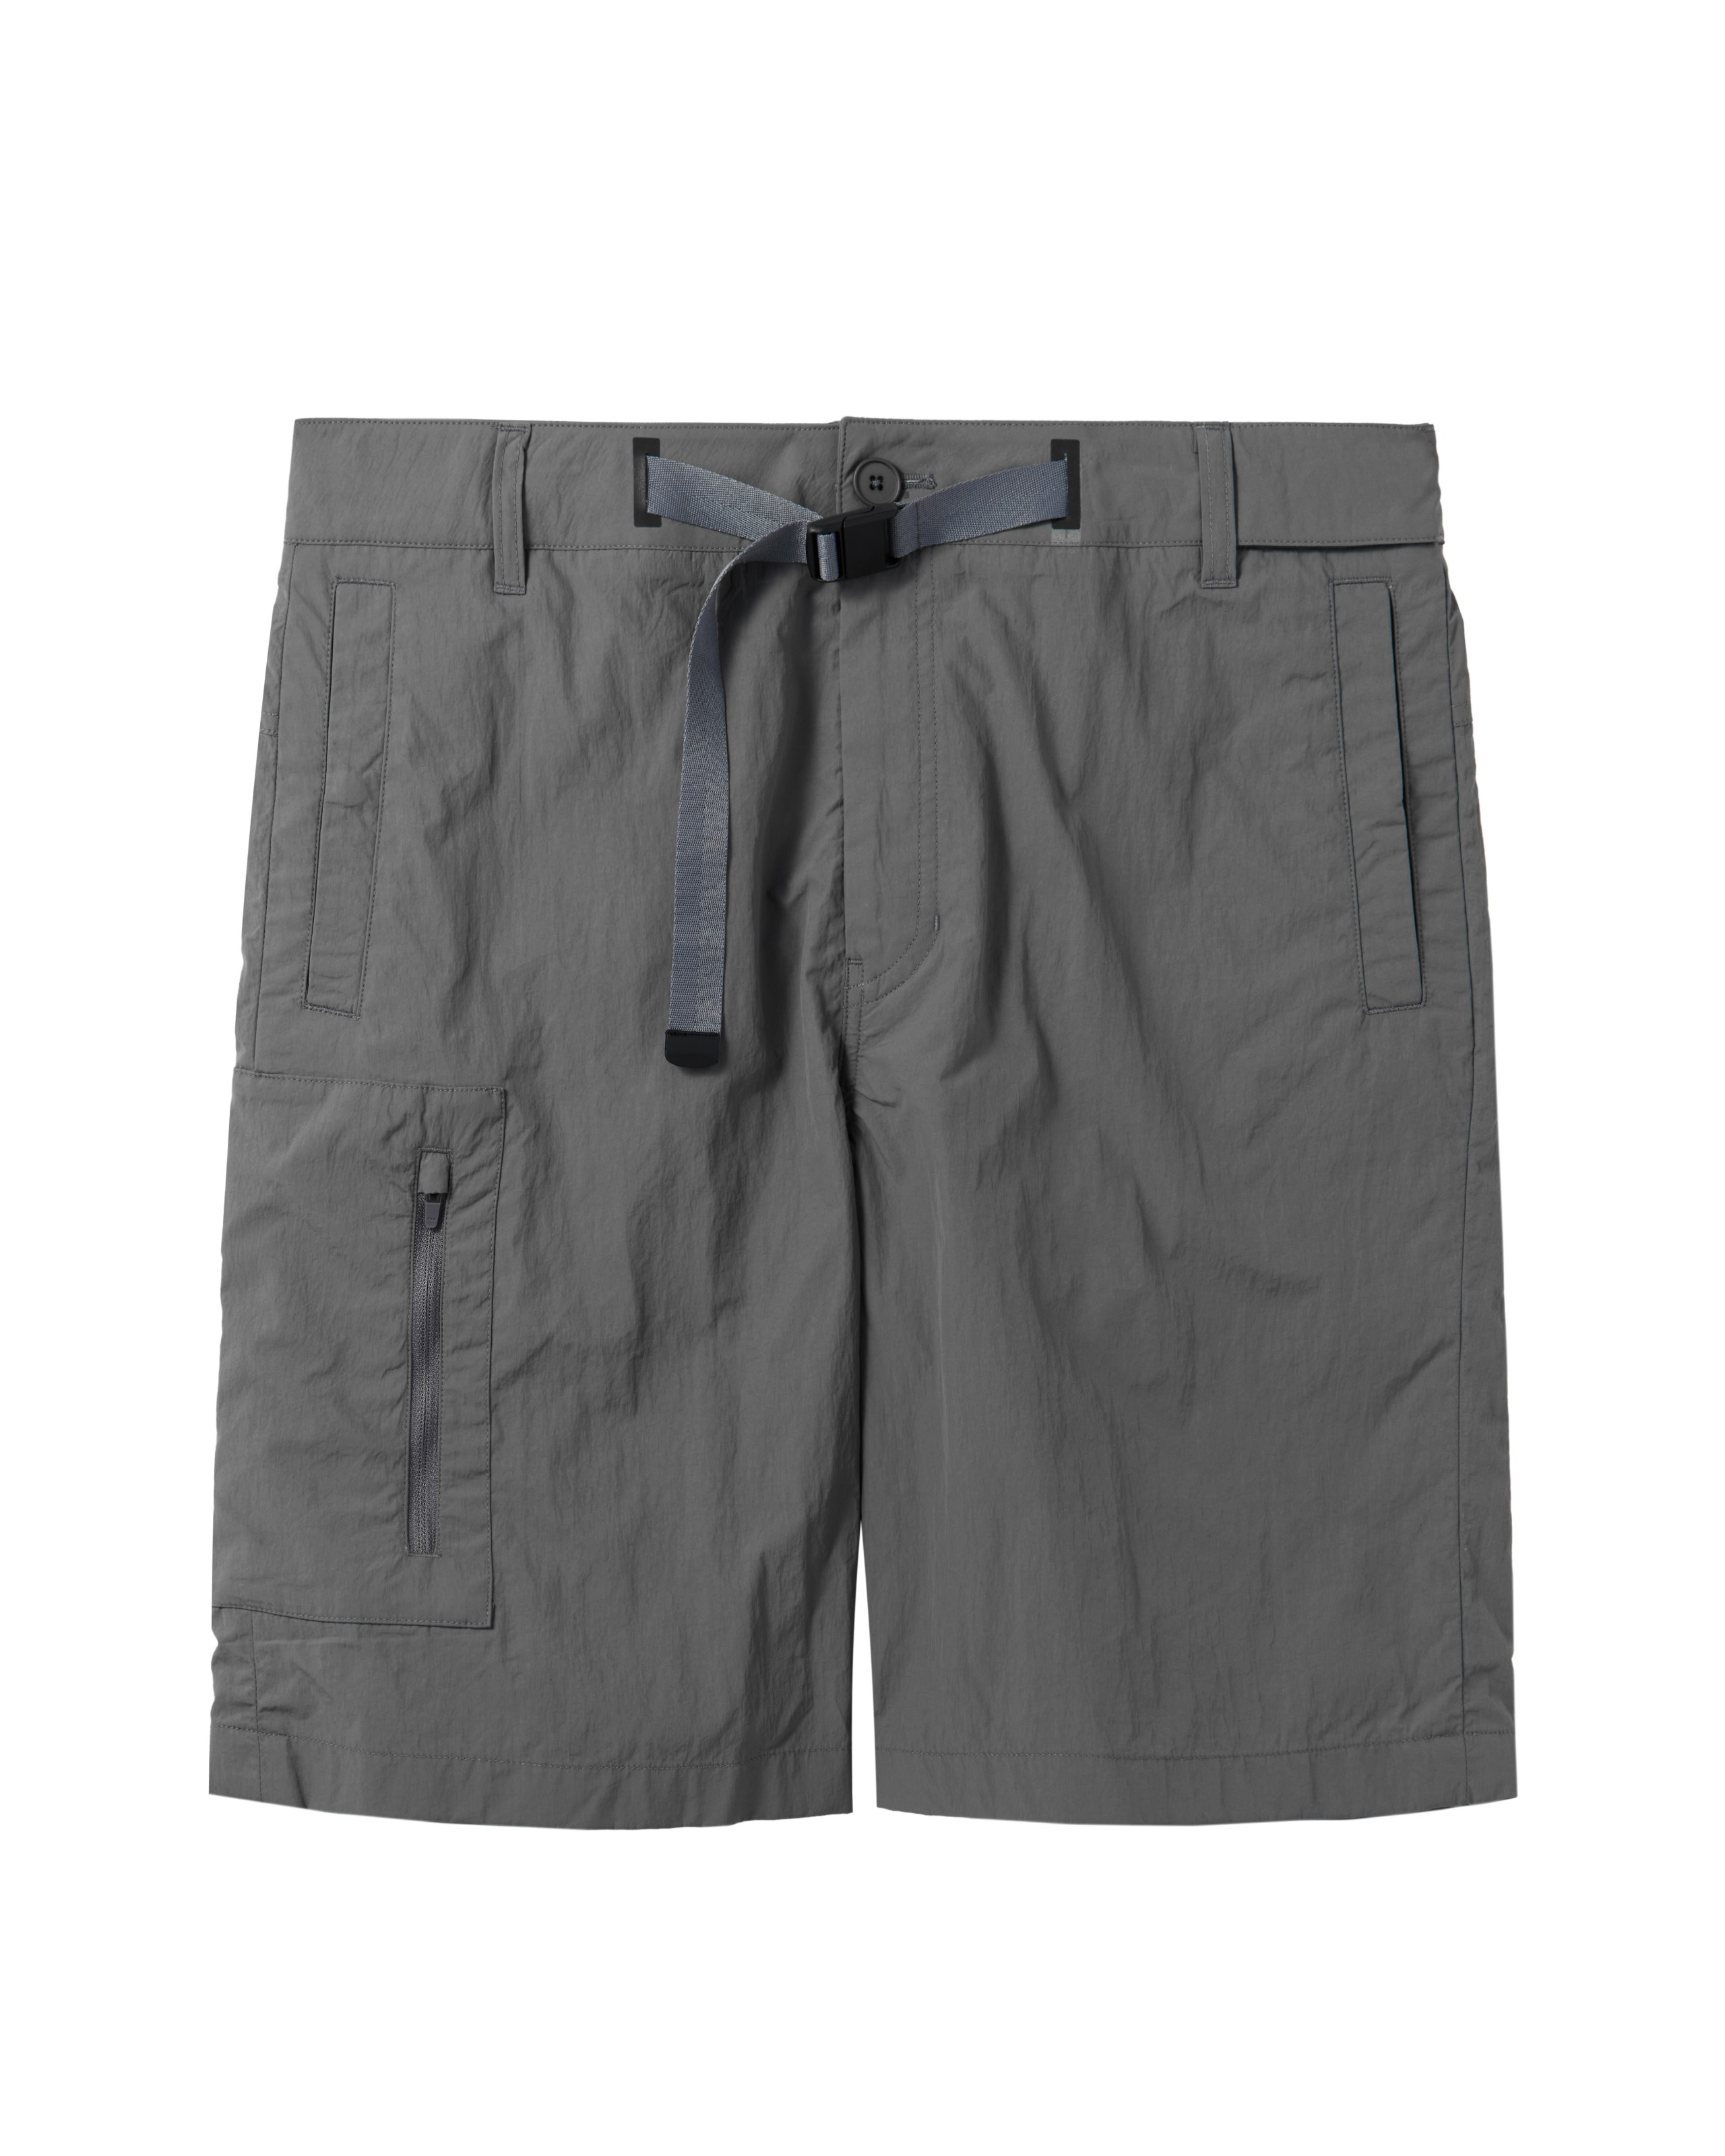 BELTED SHORTS - D/GREY